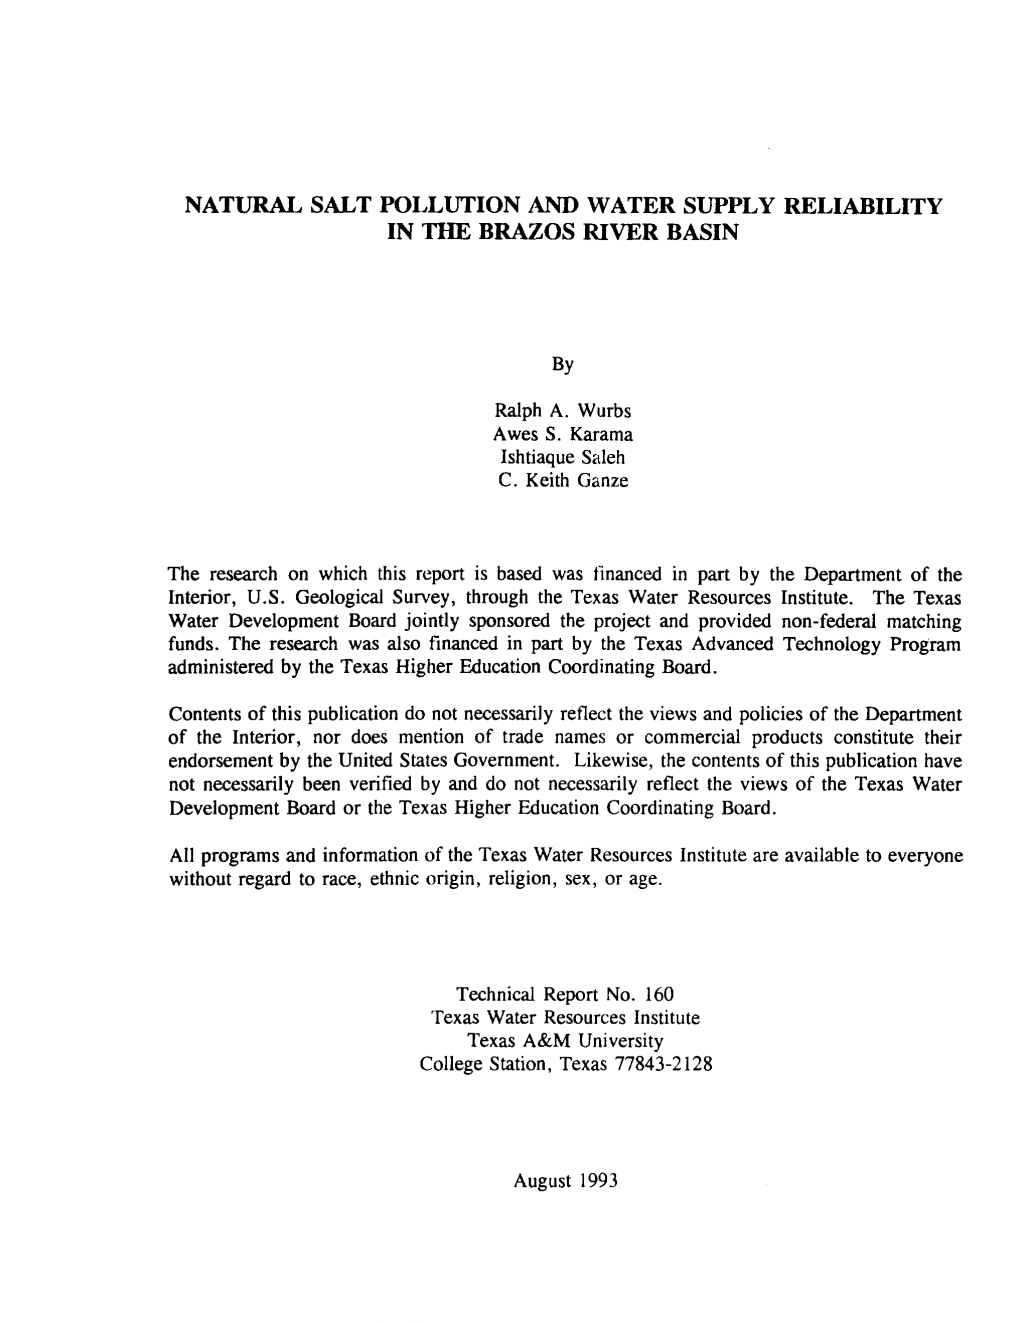 Natural Salt Pollution and Water Supply Reliability in the Brazos River Basin